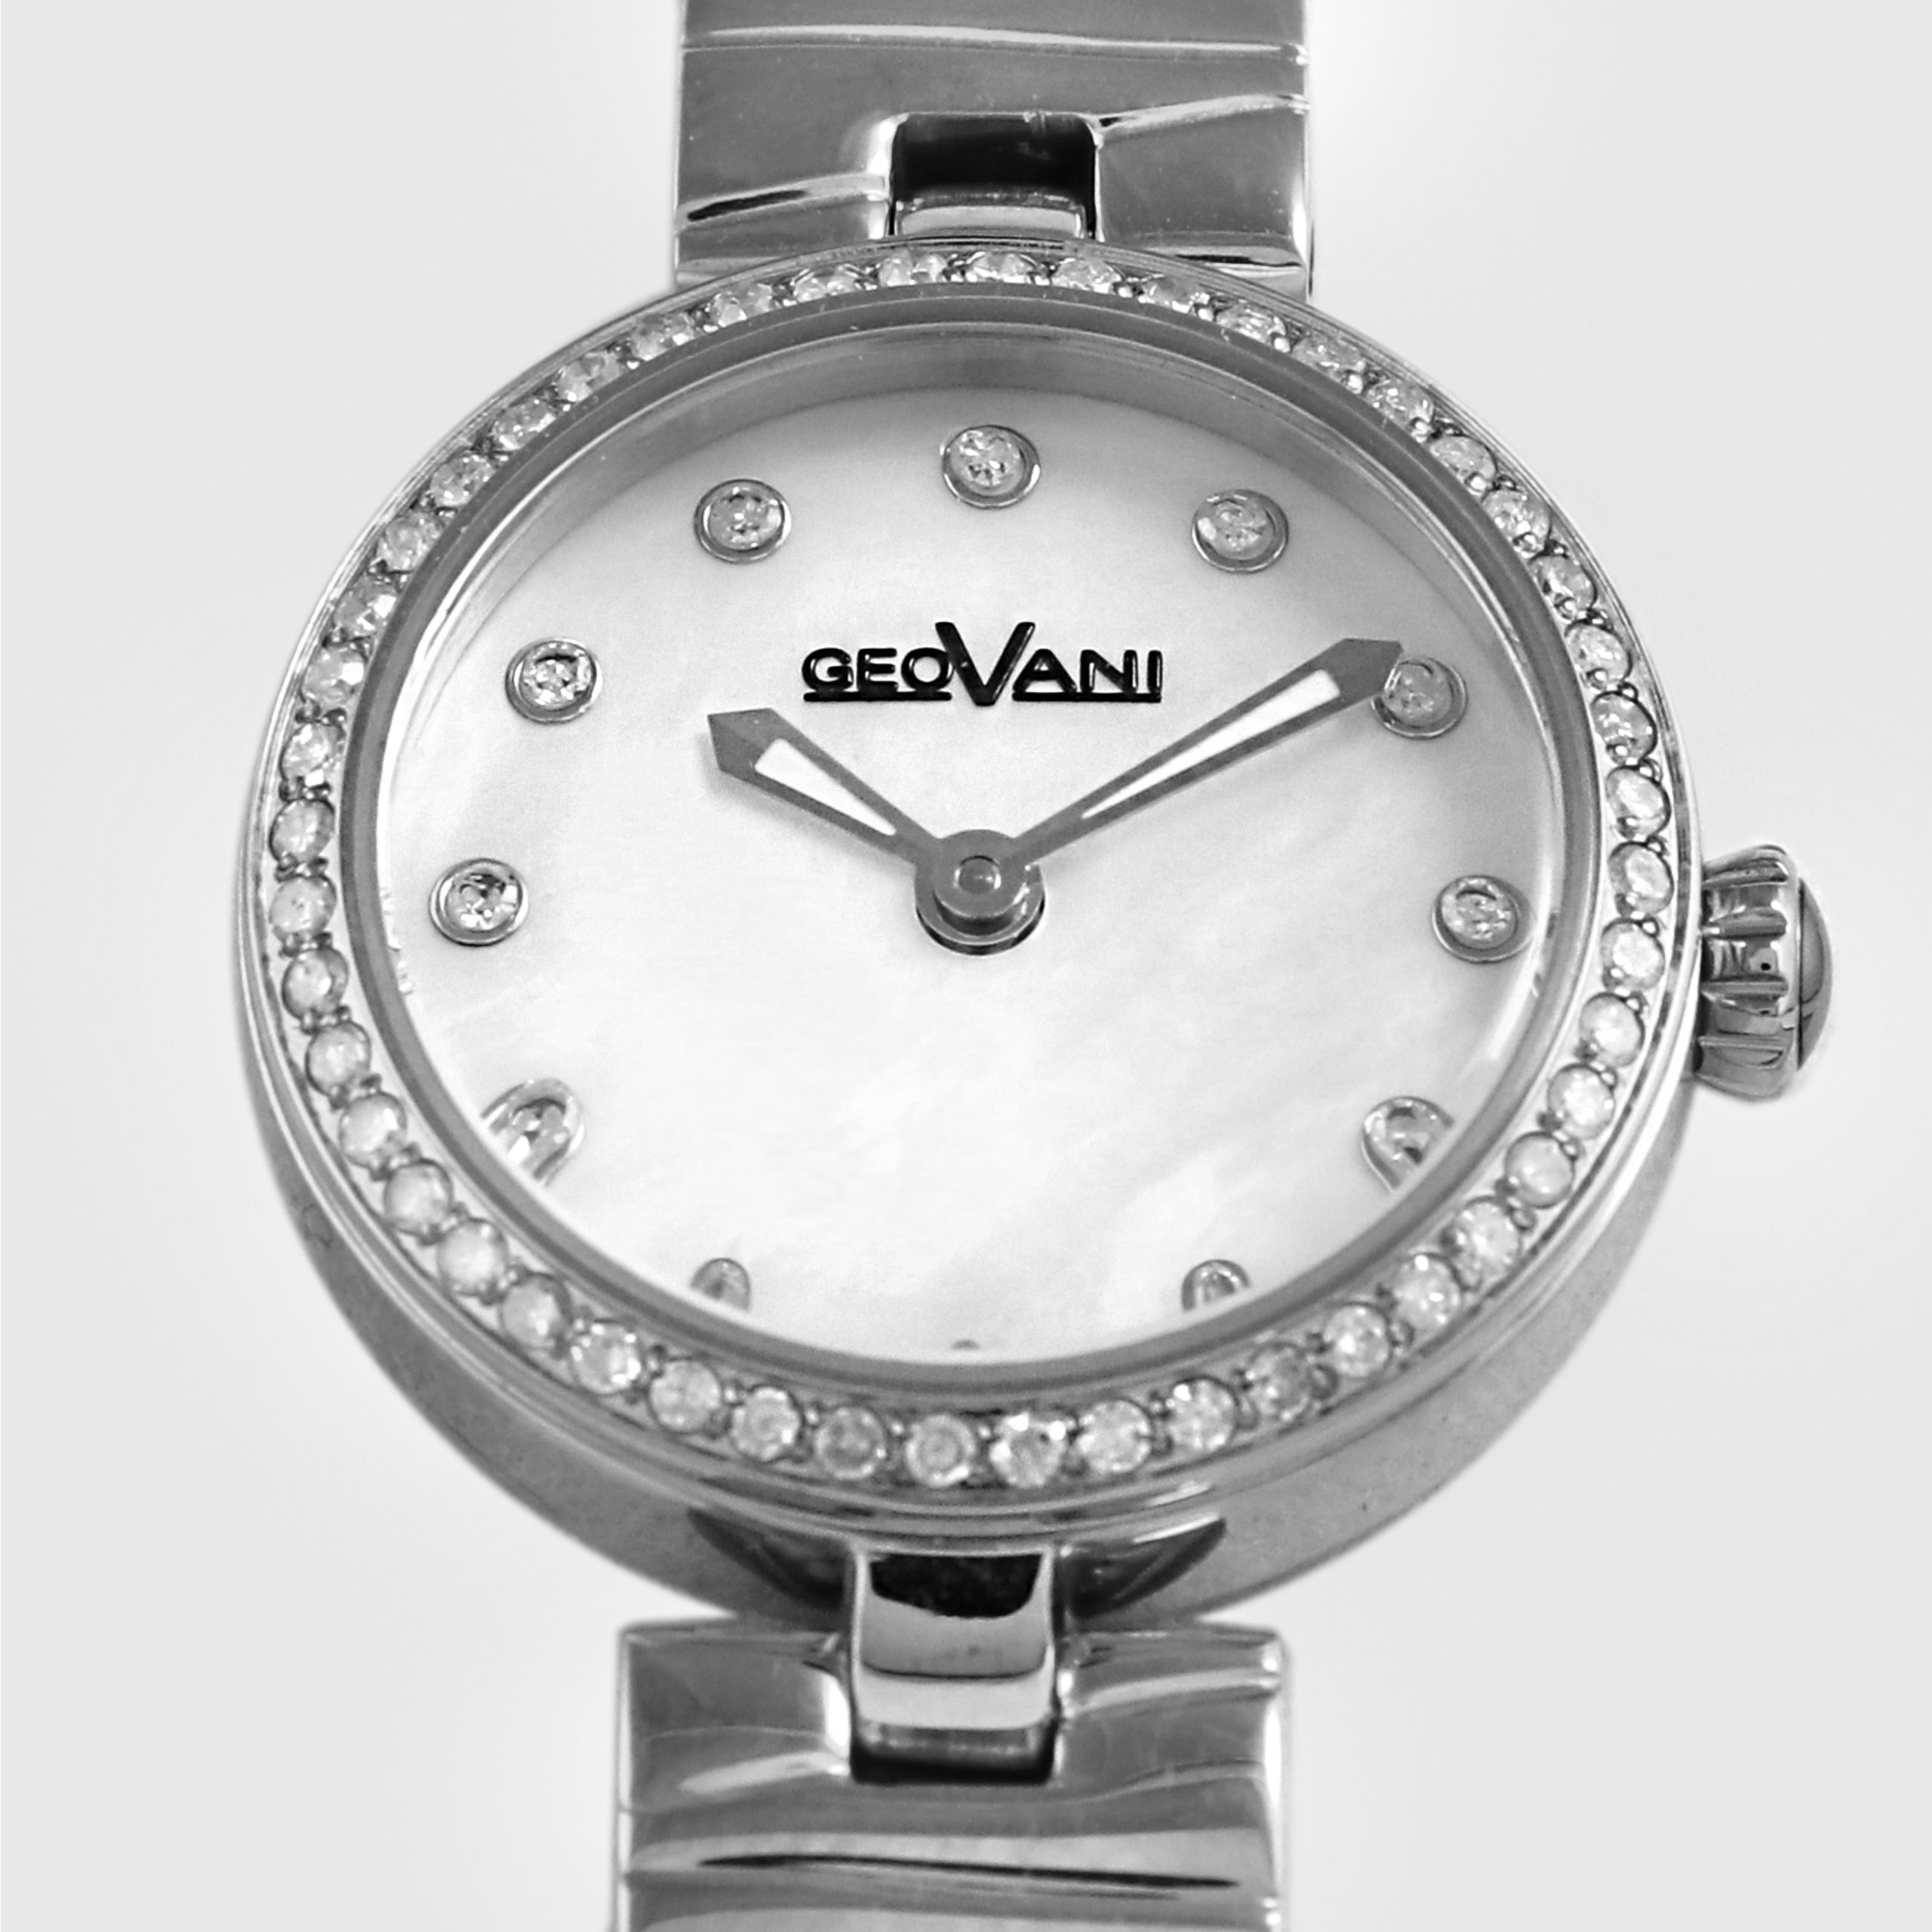 Giovanni Women's Swiss Quartz Watch with Pearly White Dial - GEO-0002